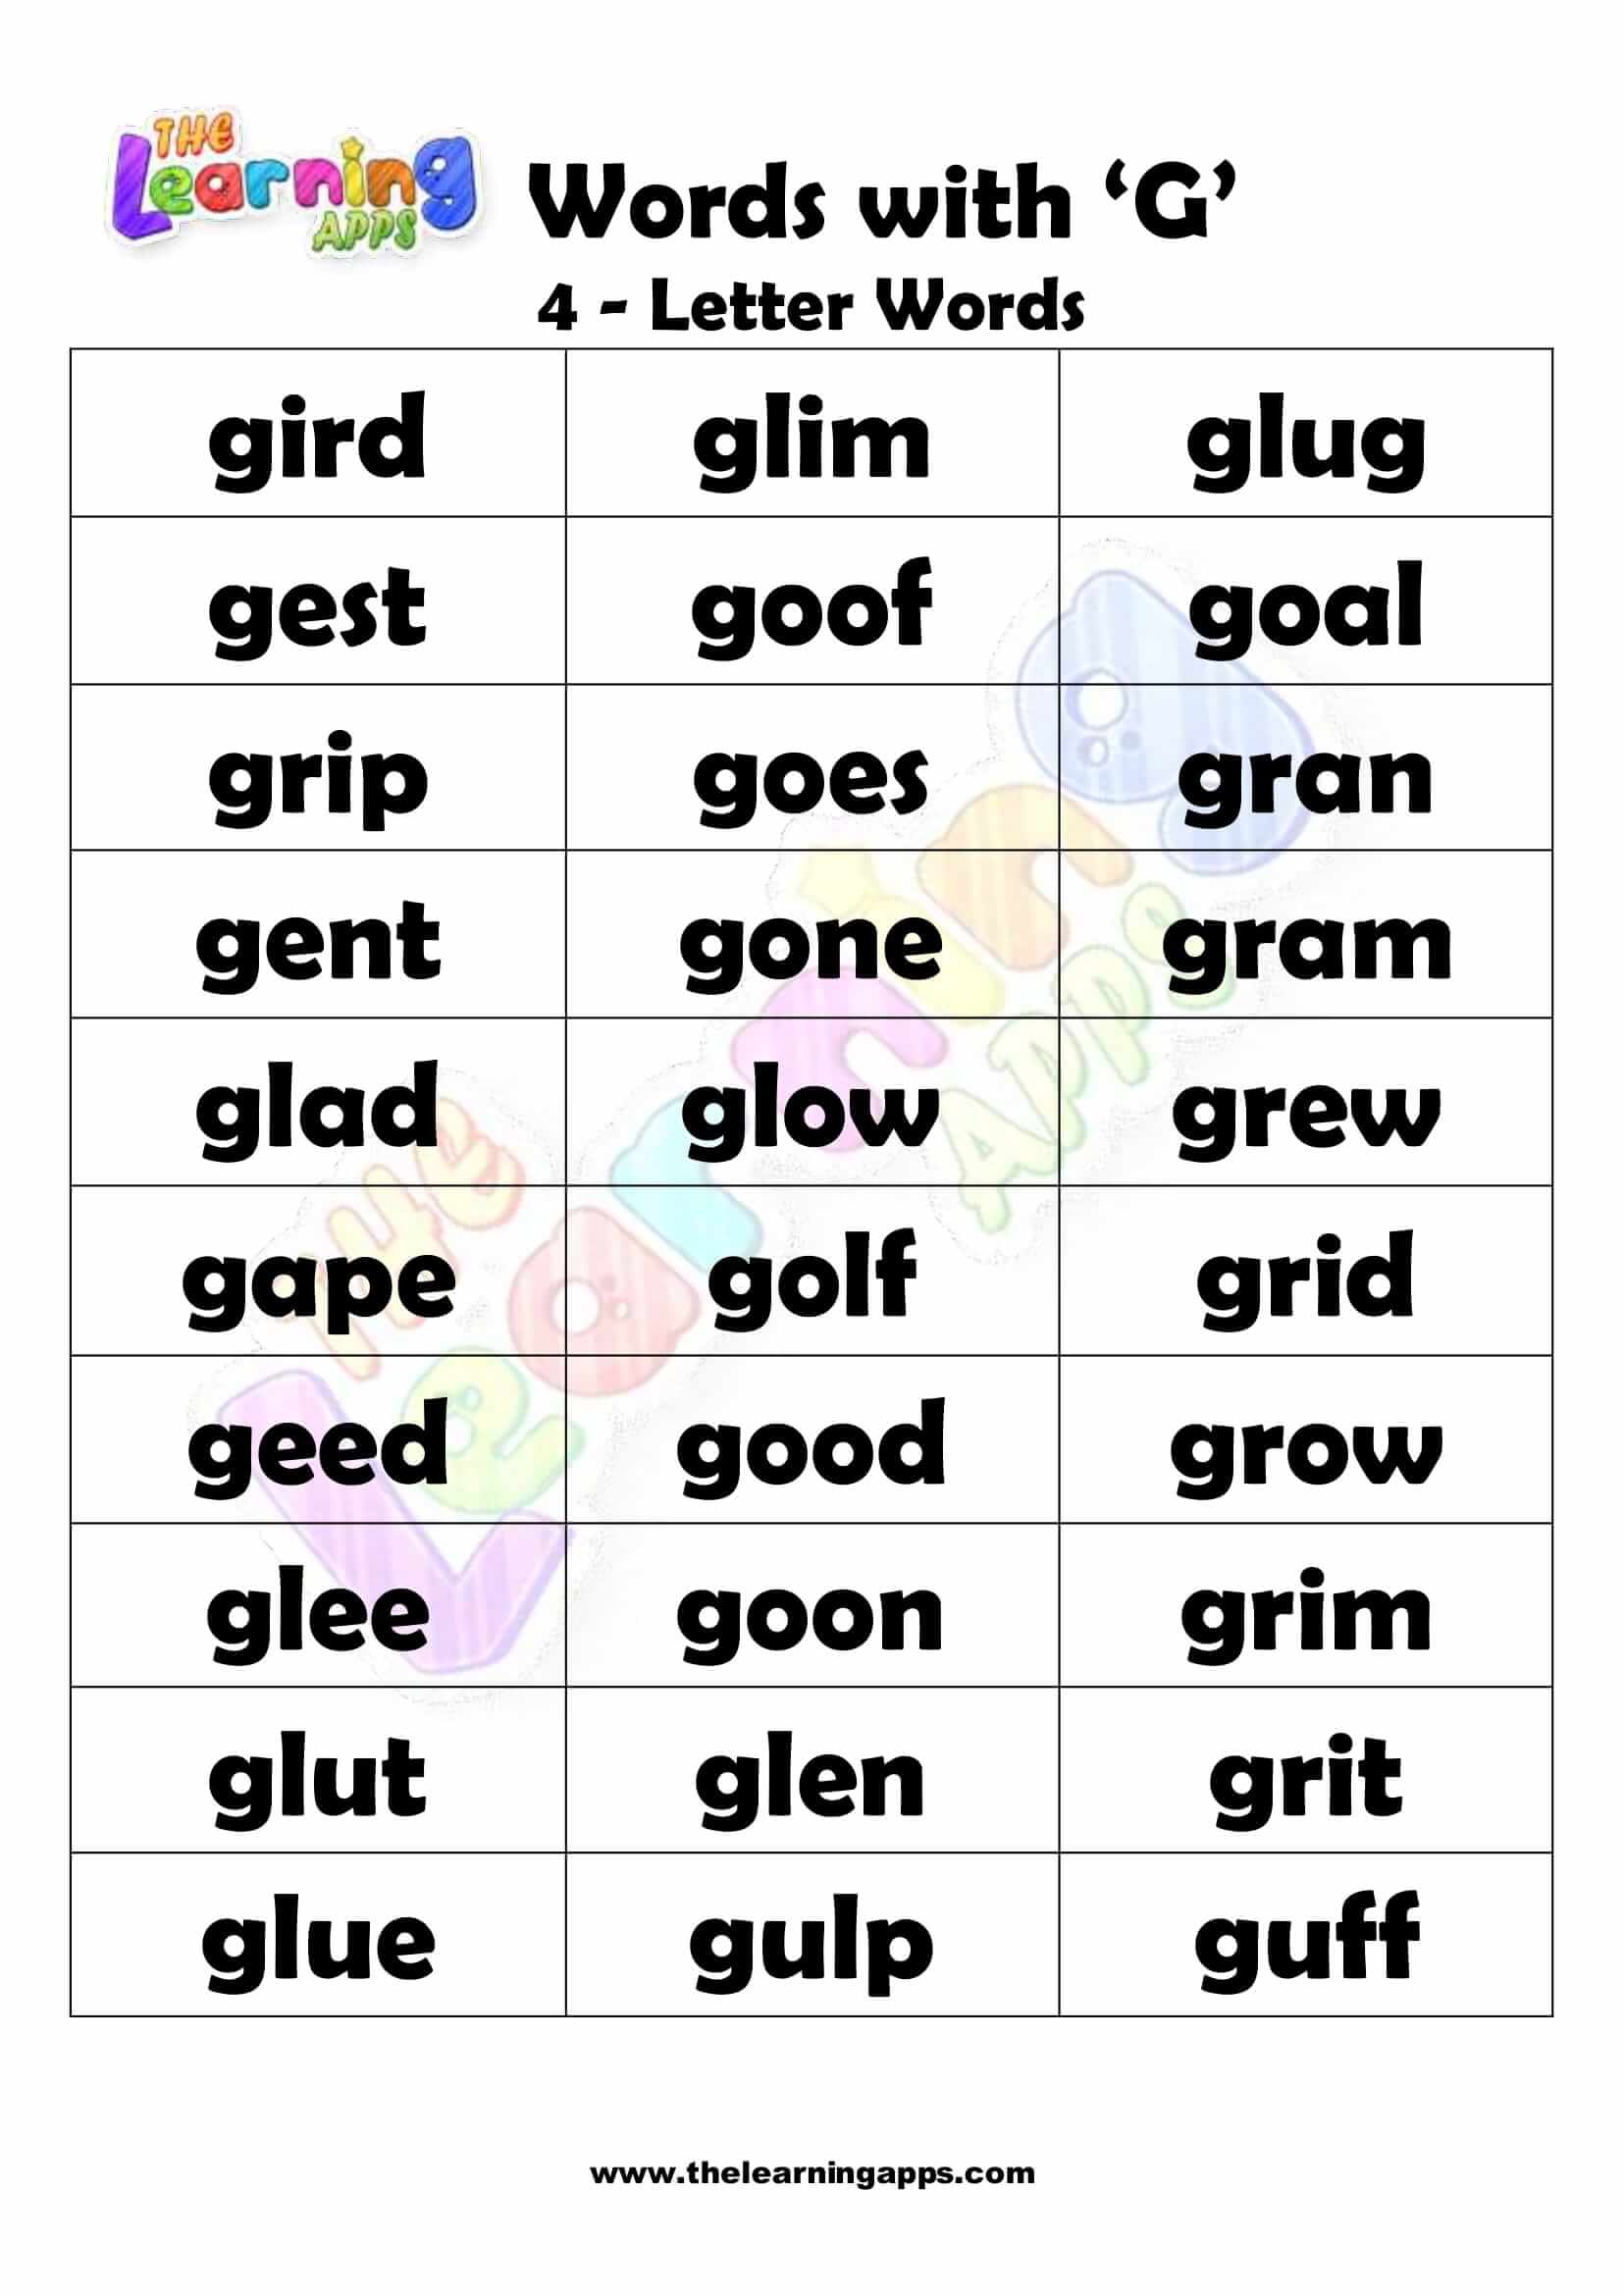 4 LETTER WORD STARTING WITH G-2